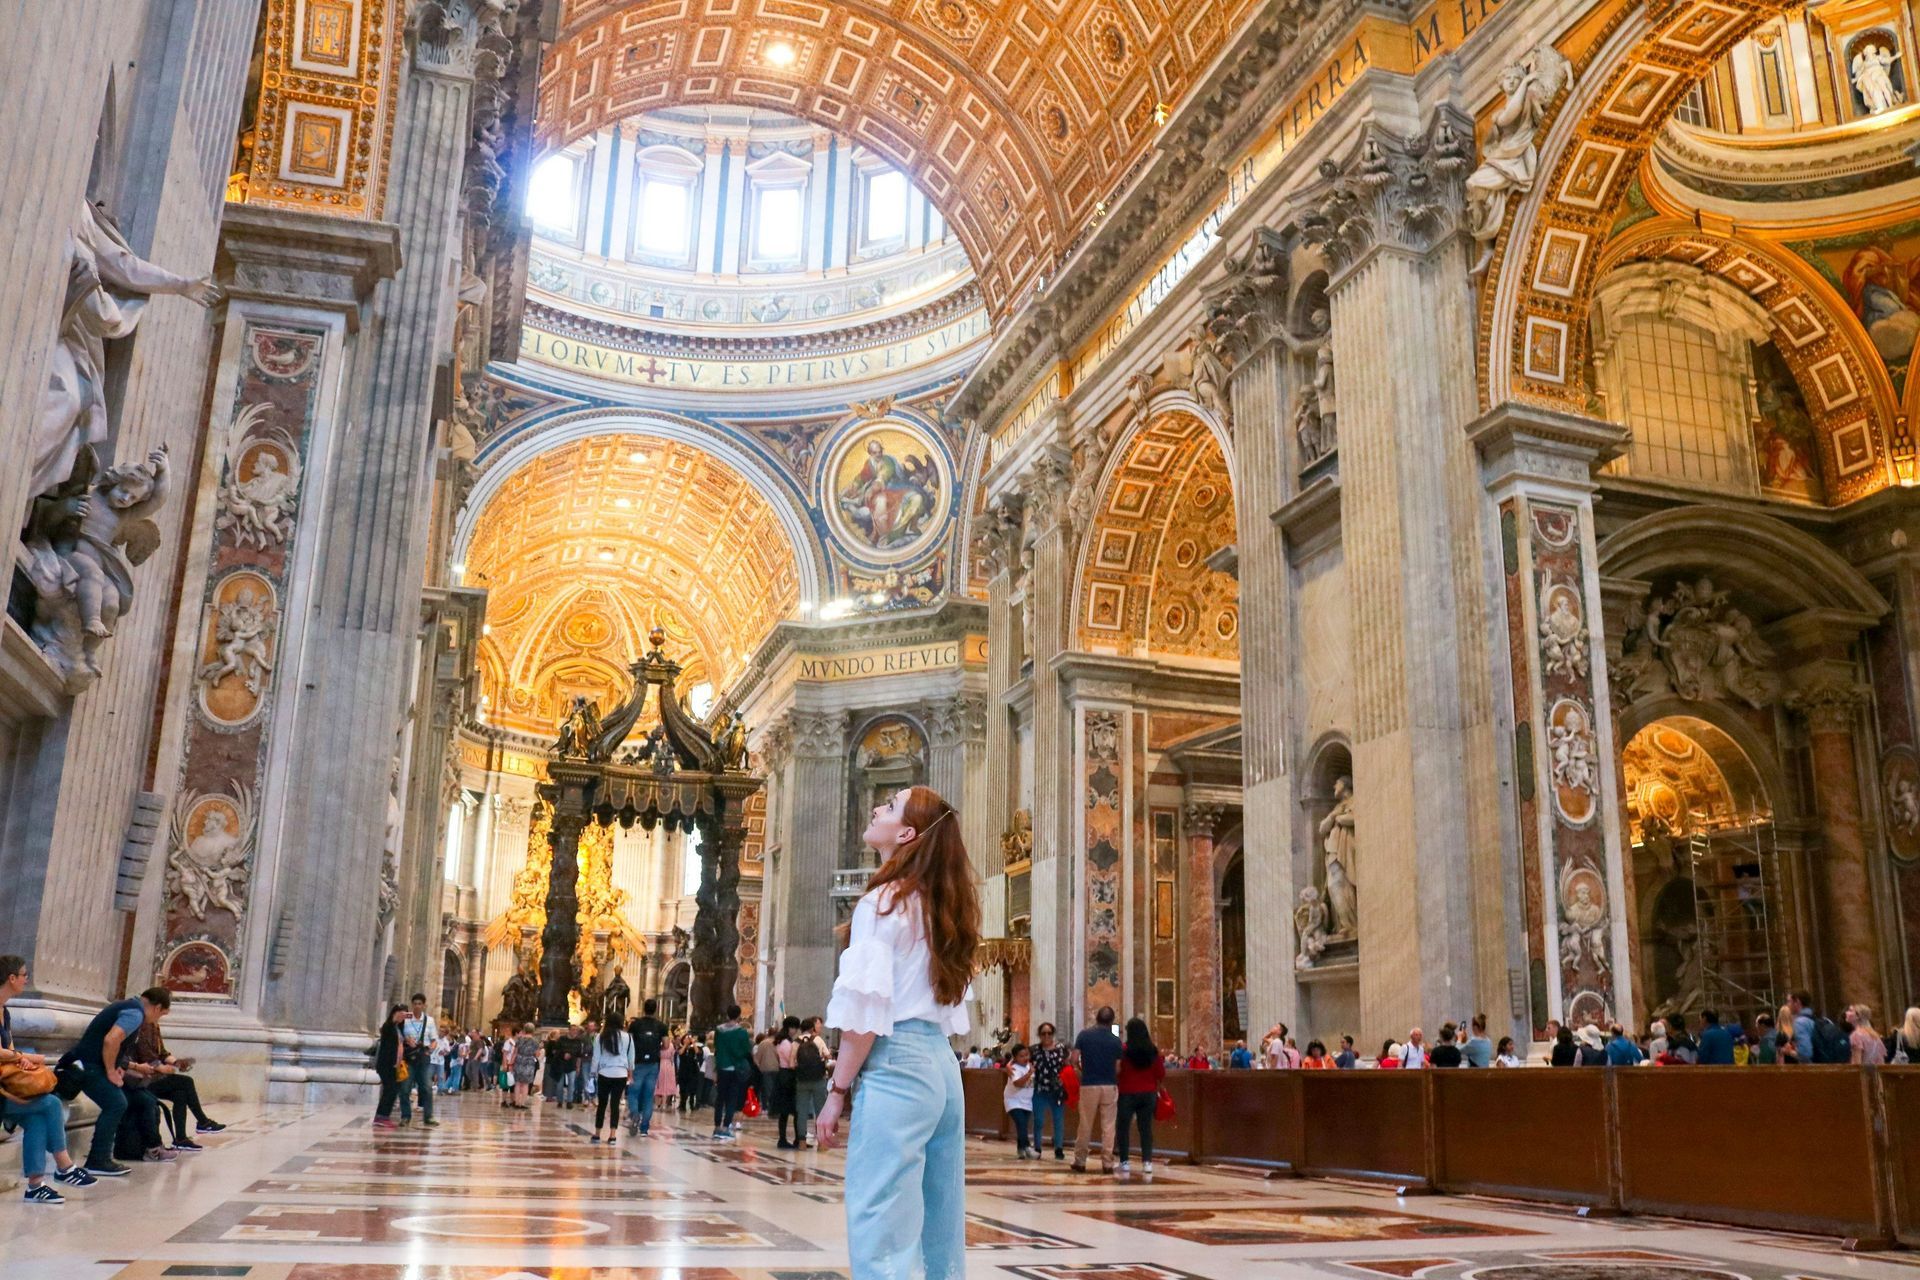 What to wear to visit the Sistine Chapel